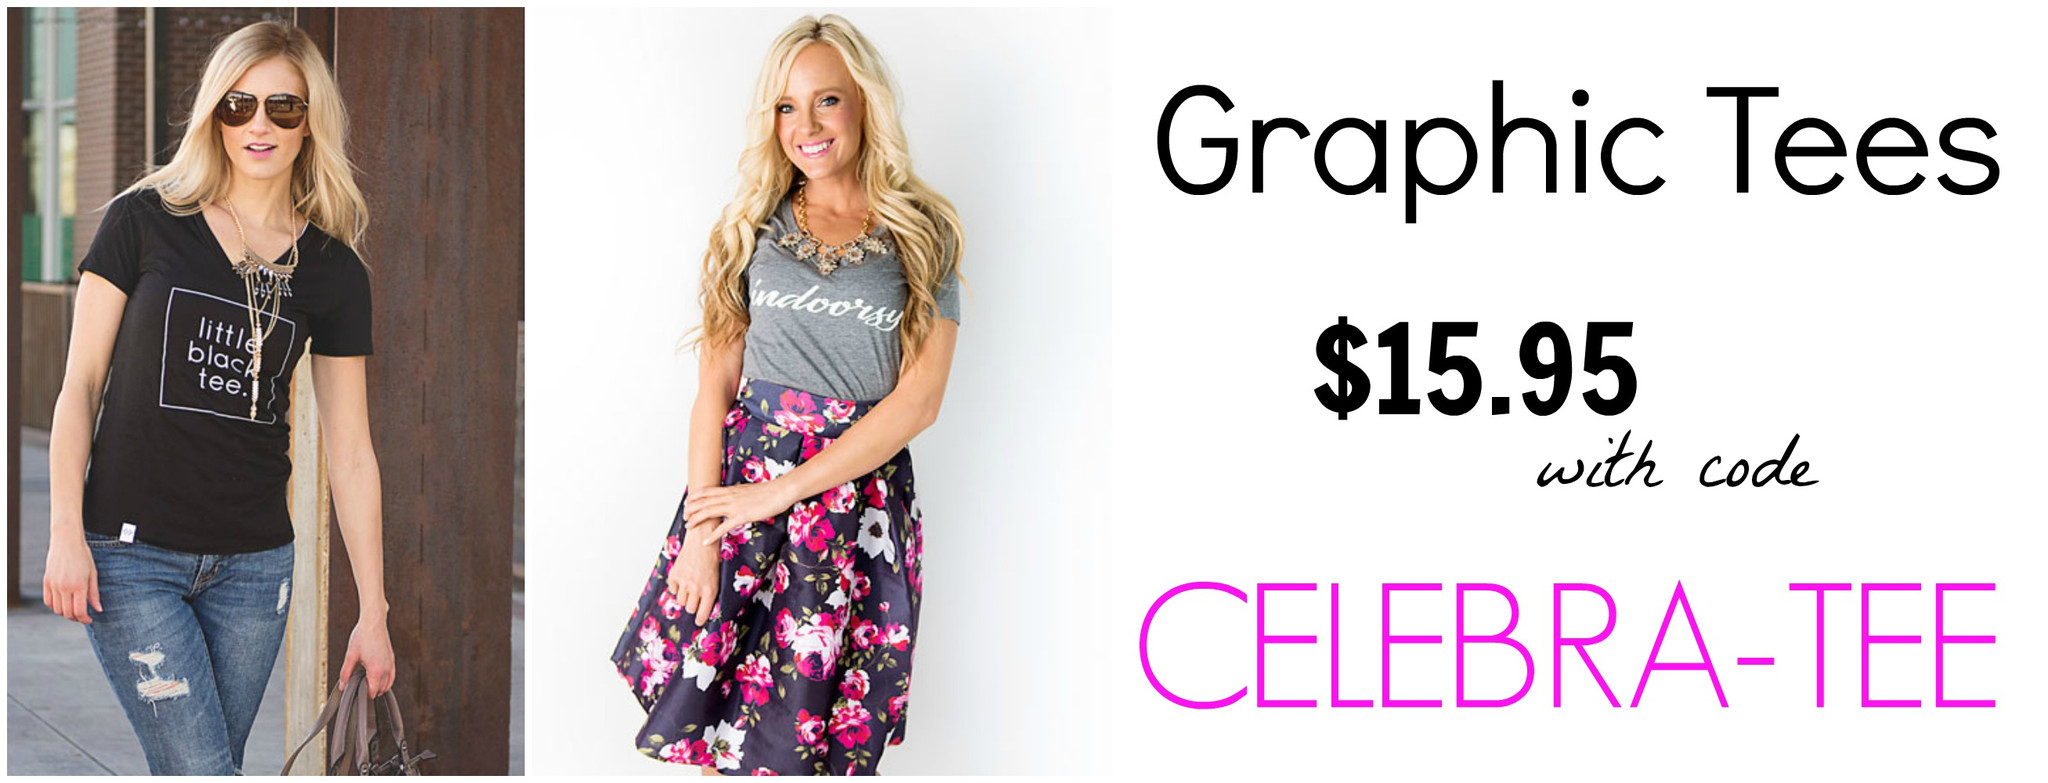 Cute Graphic Tees Only $15.95 Shipped!